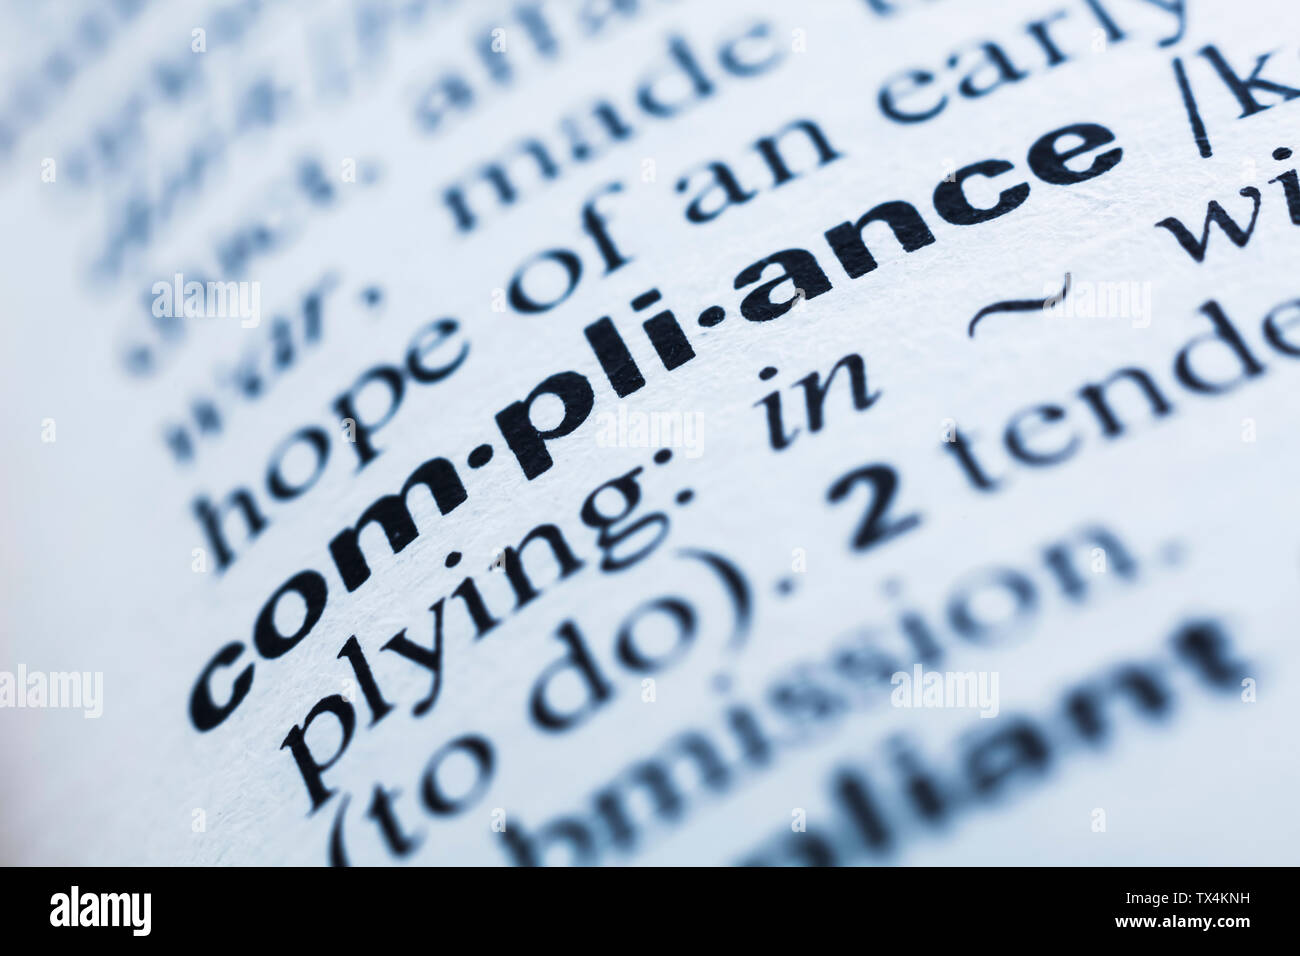 Keyword in a dictionary, compliance Stock Photo